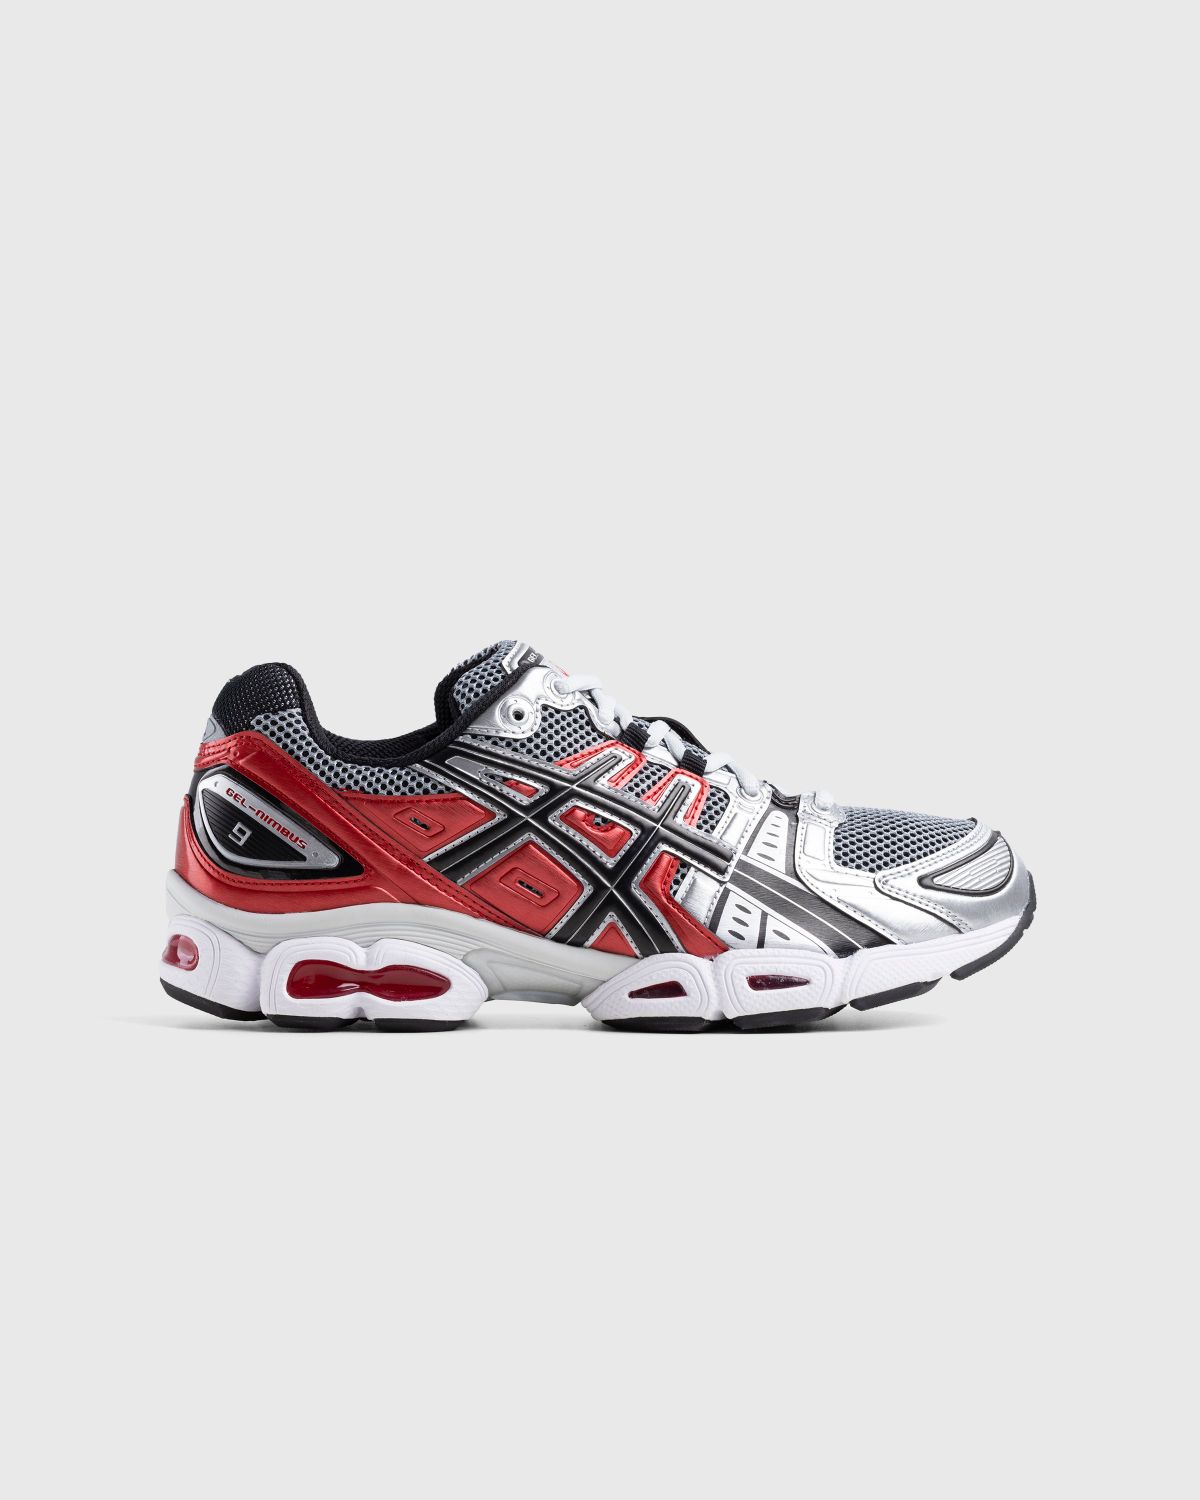 asics – Gel-Nimbus 9 Pure Silver/Classic Red - Sneakers - Red - Image 1